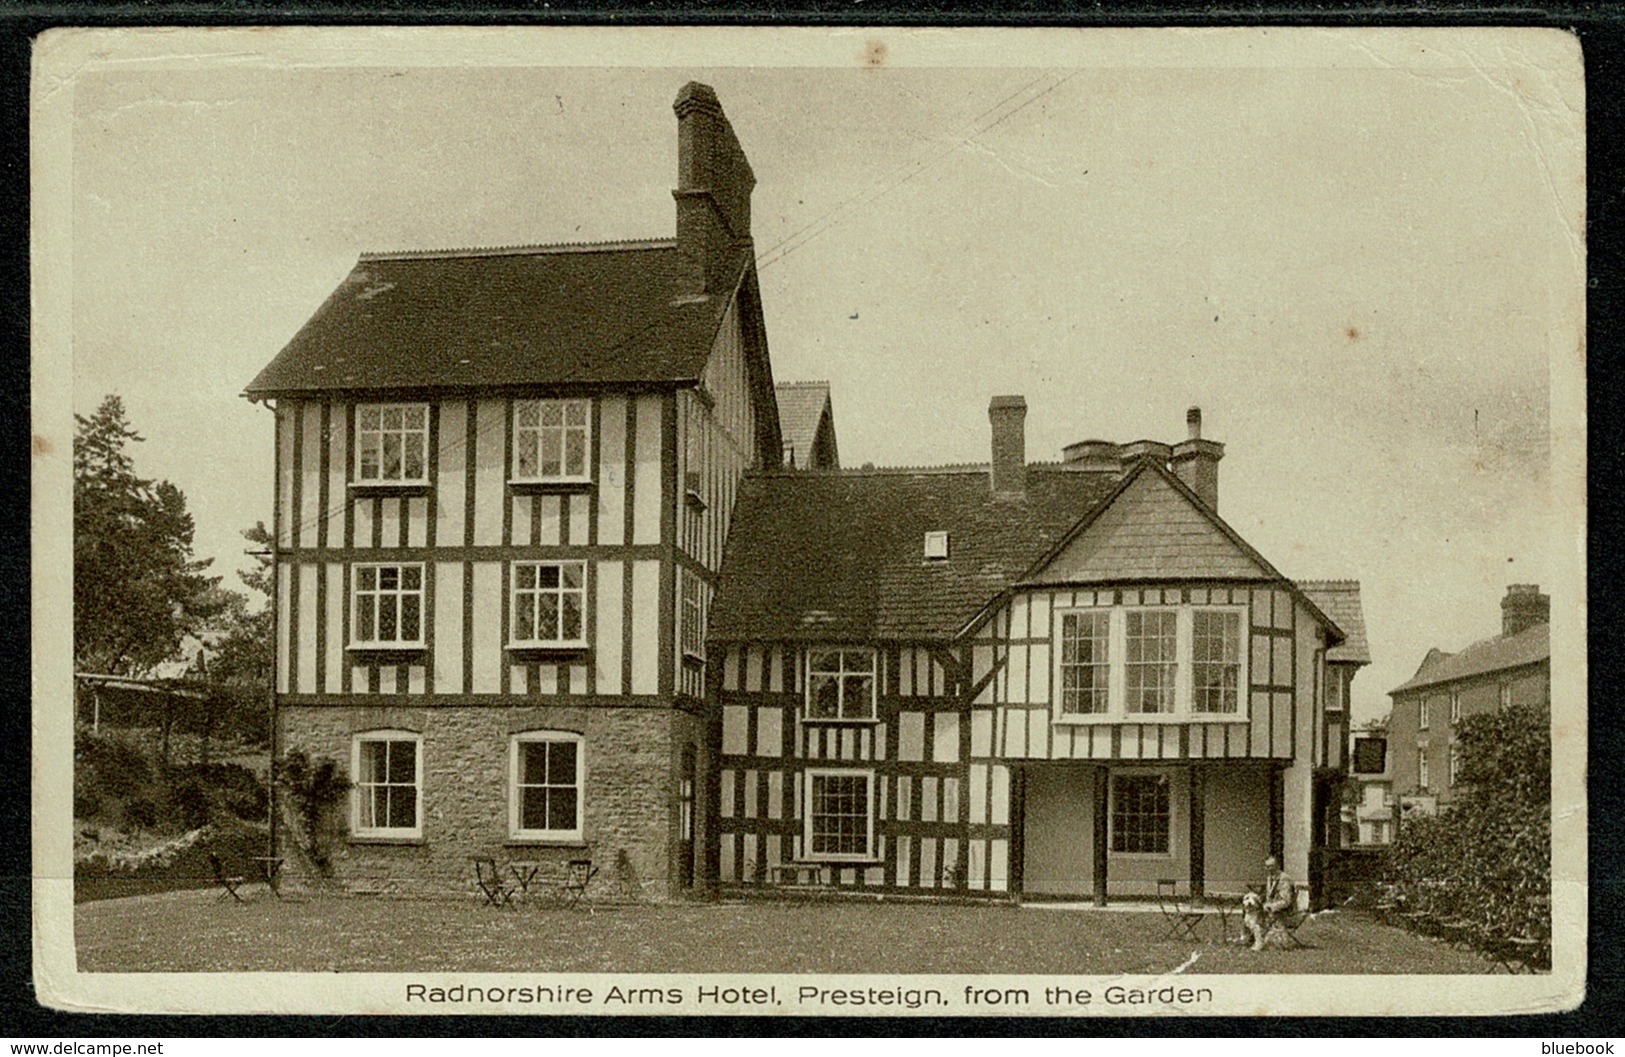 Ref 1286 - Early Postcard - Radnorshire Arms Hotel - Presteign Wales - Trust House - Radnorshire